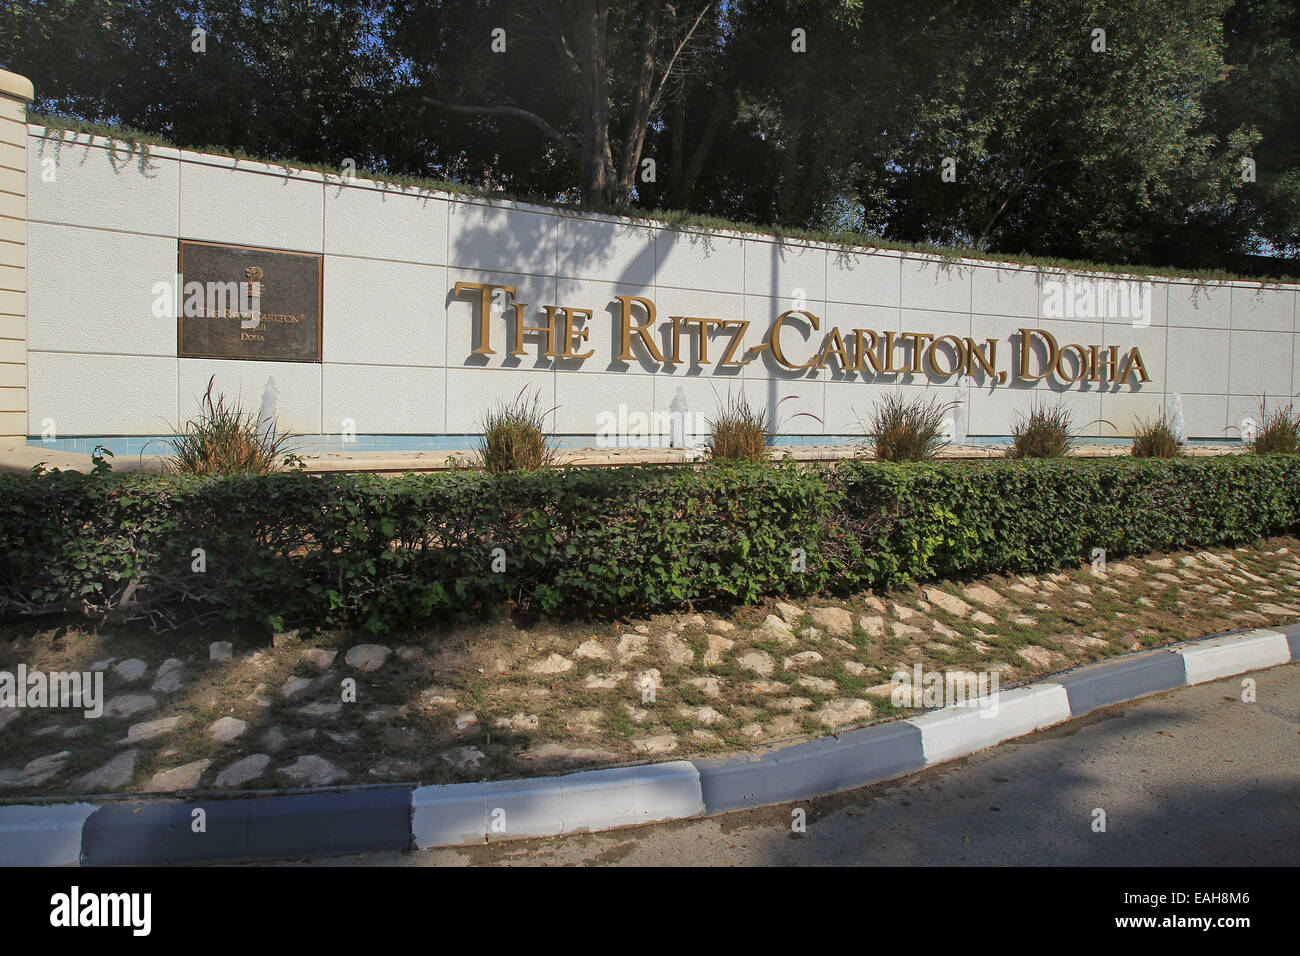 A general view showing the name of the Ritz-Carlton Hotel, Doha, Qatar from the bottom of the driveway Stock Photo